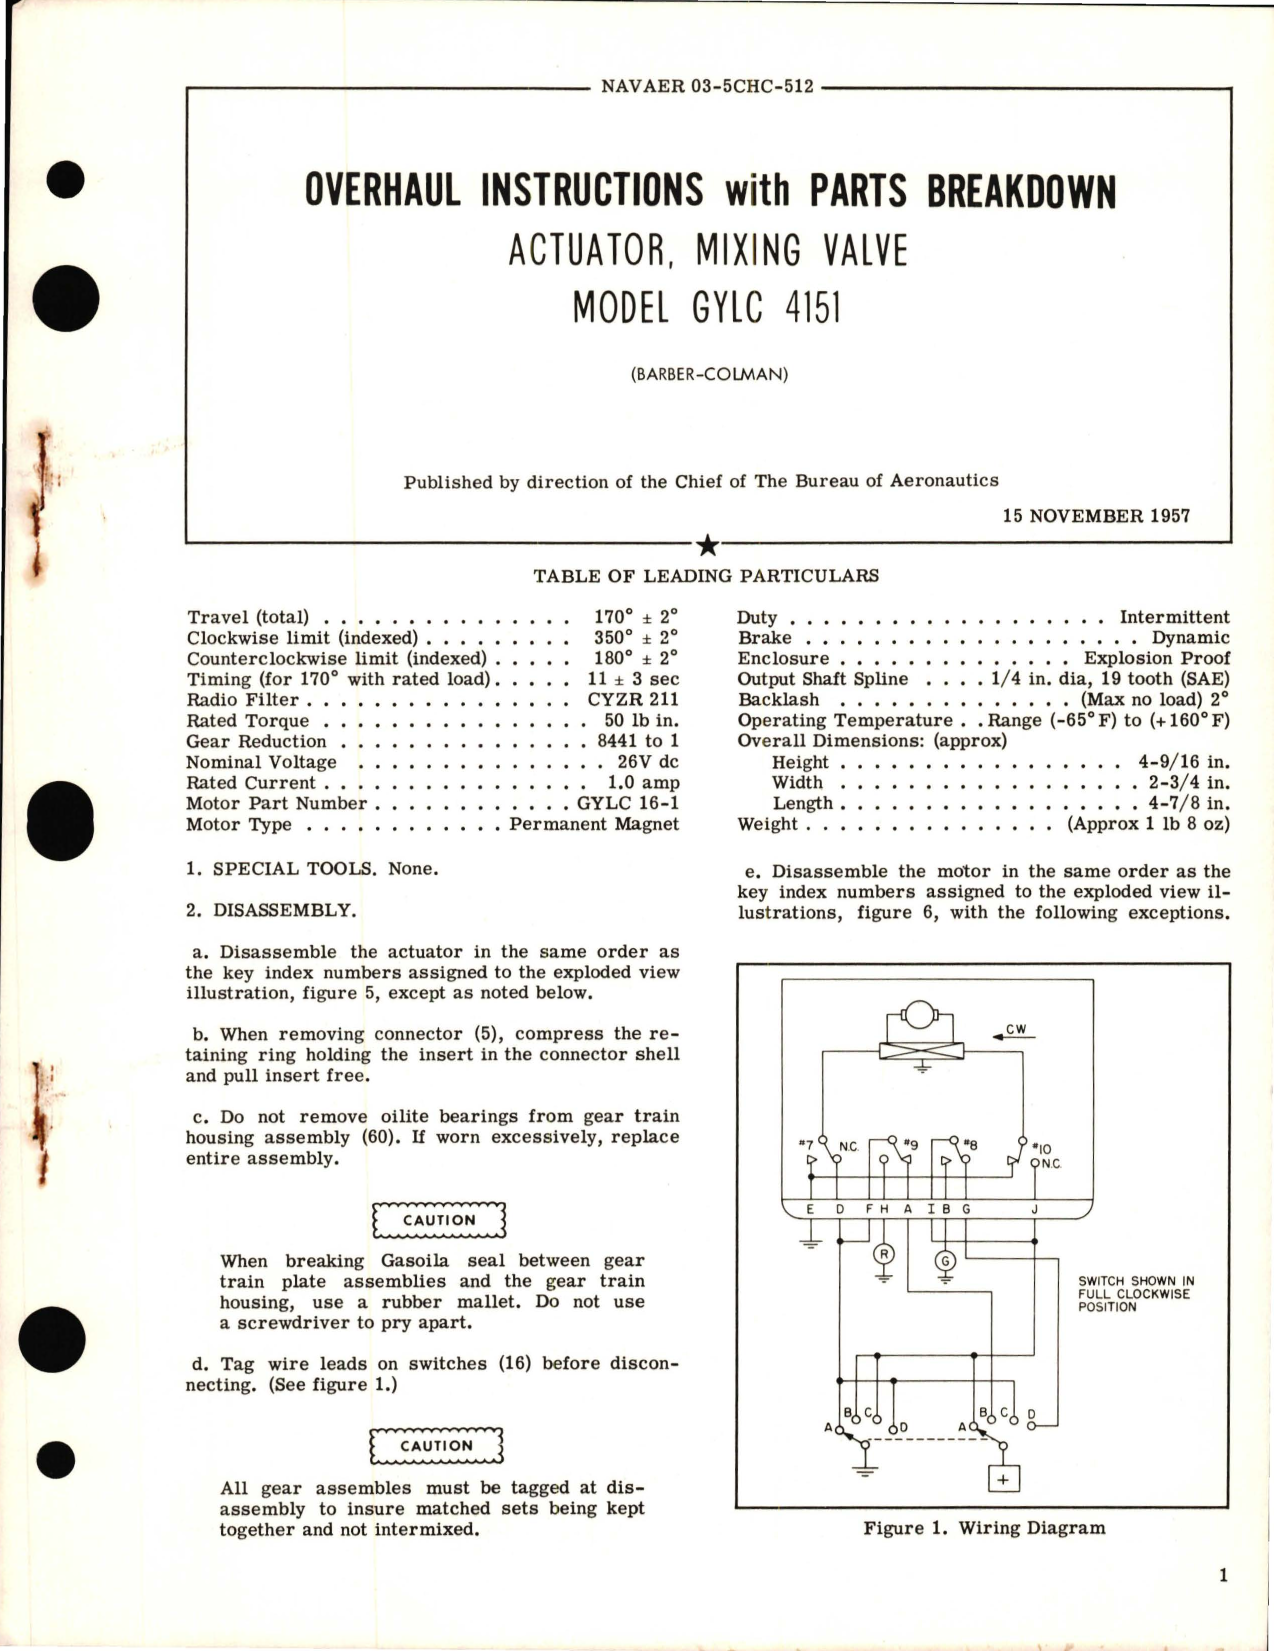 Sample page 1 from AirCorps Library document: Overhaul Instructions with Parts Breakdown for Mixing Valve Actuator - Model GYLC 4151 